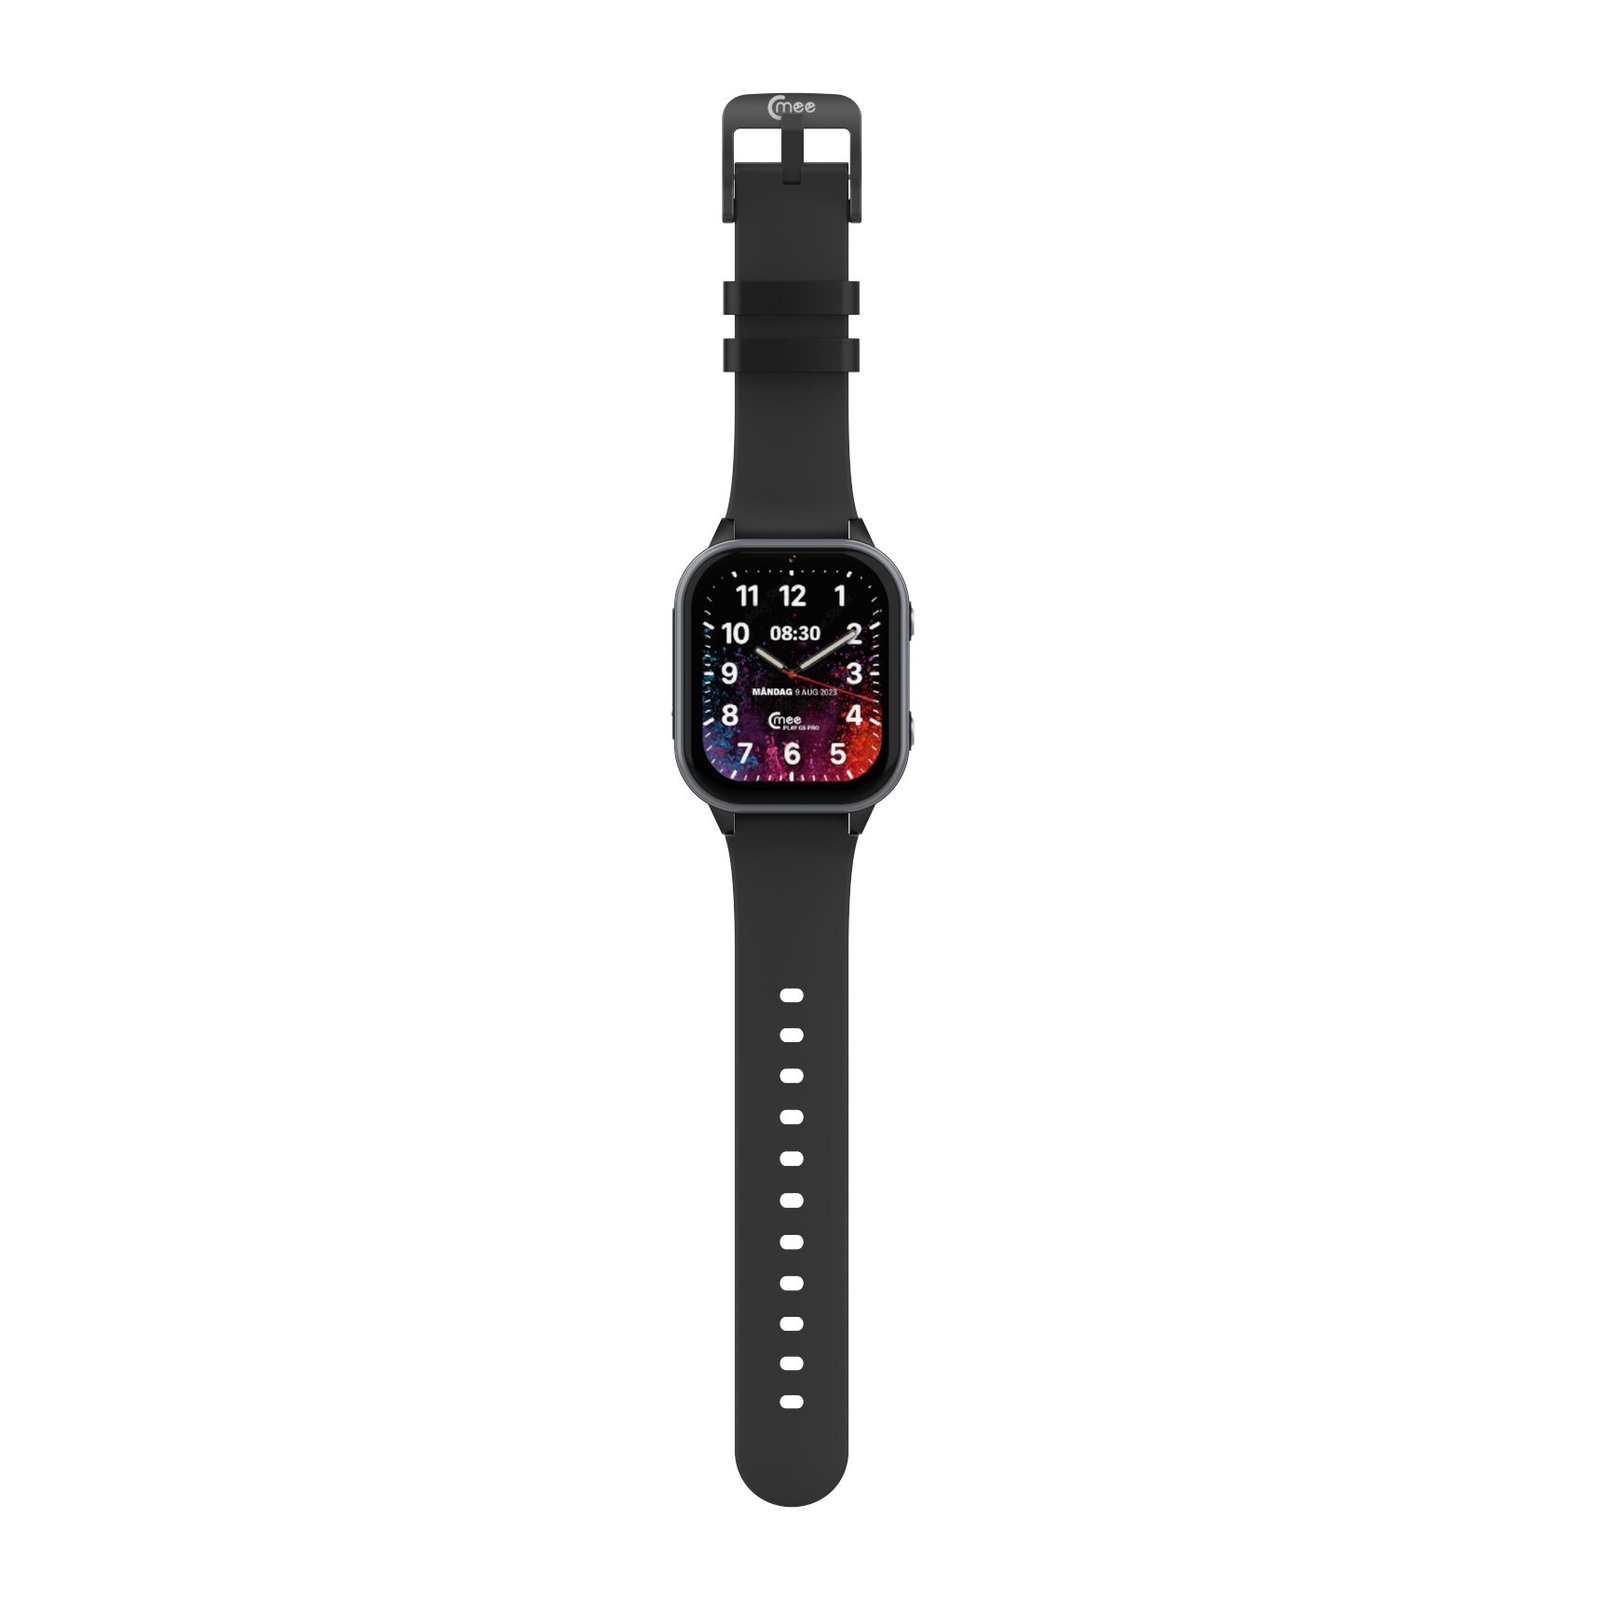 CMEE PLAY Mobile Watch G5 Pro Black